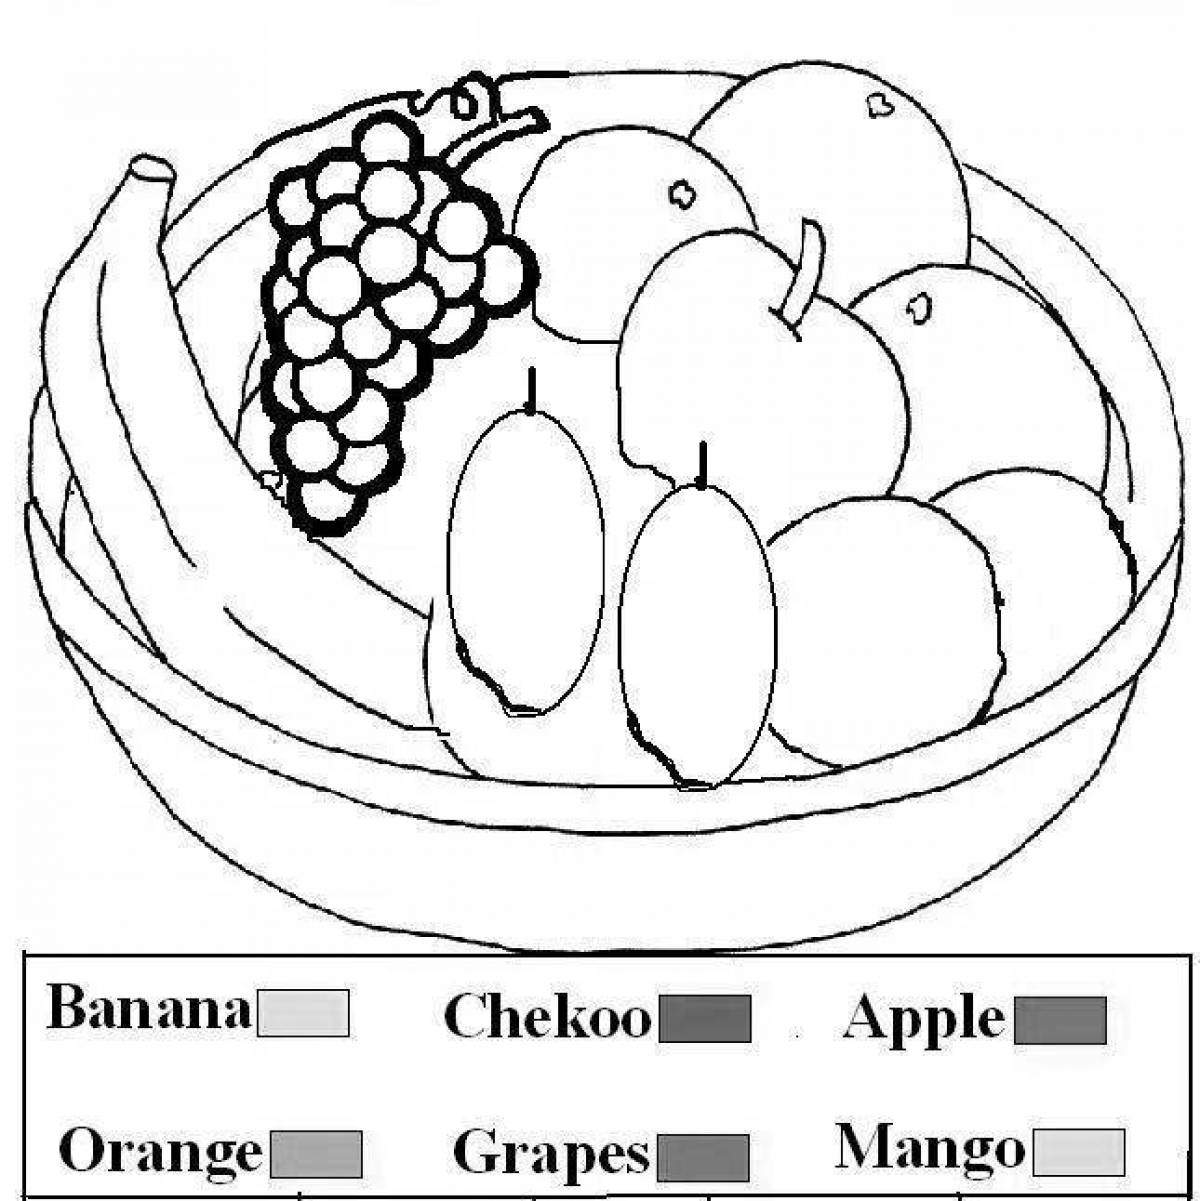 Grand fruits coloring pages for kids